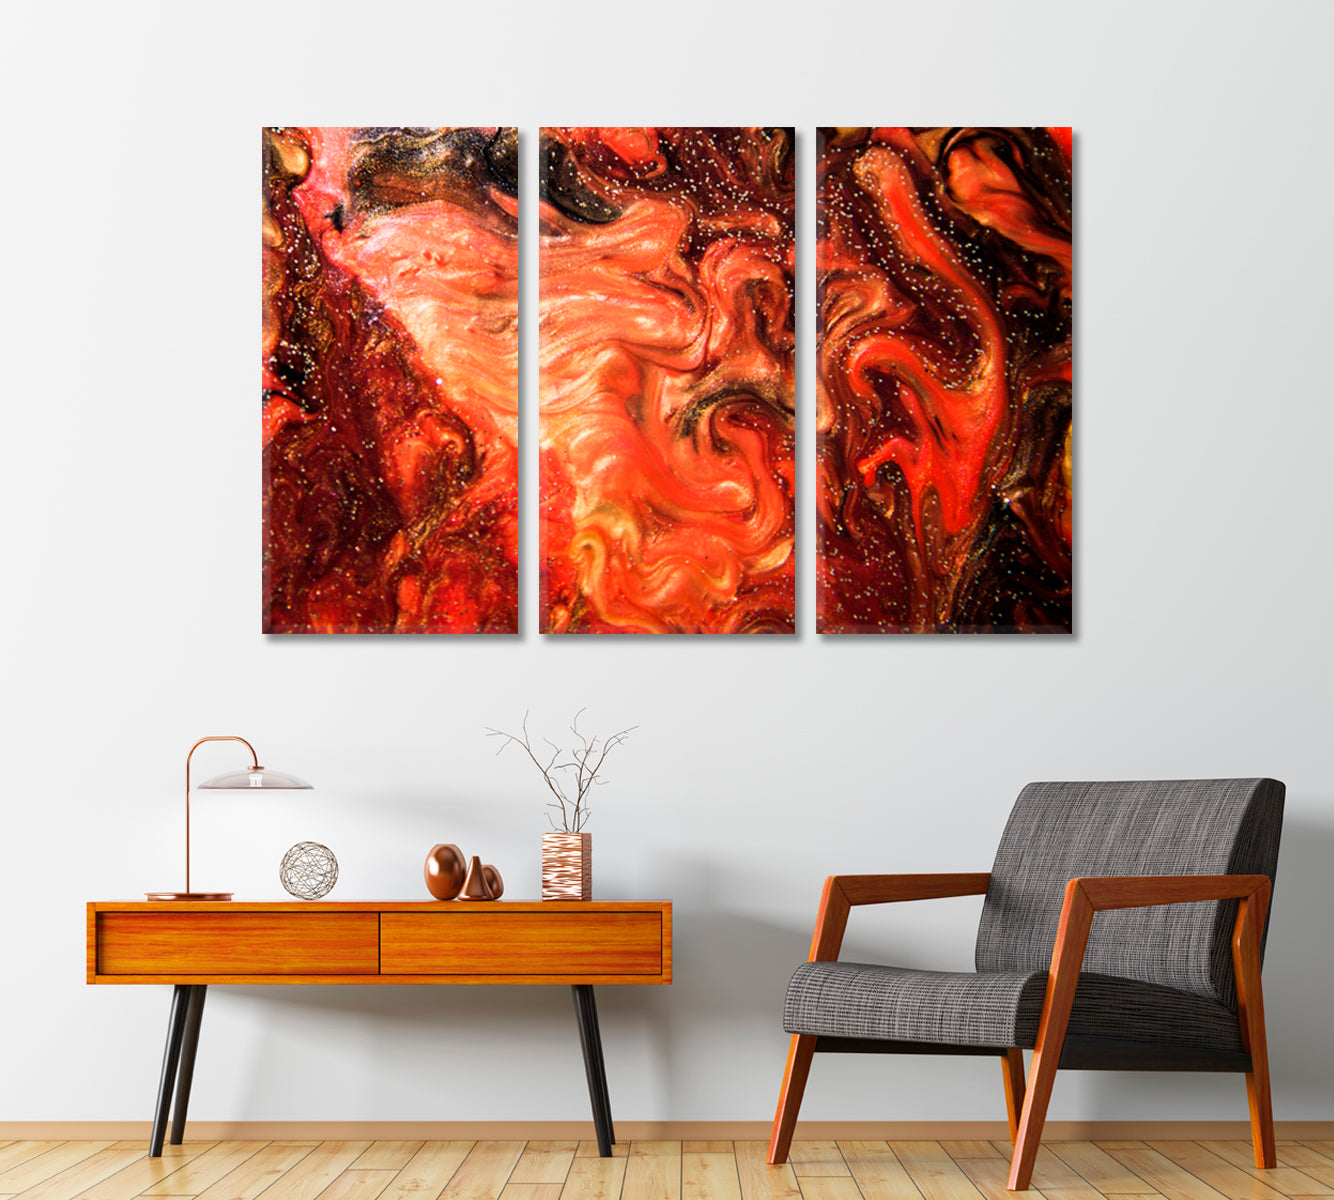 Red Liquid Abstract Pattern of Acrylic Colors Canvas Print-Canvas Print-CetArt-3 Panels-36x24 inches-CetArt